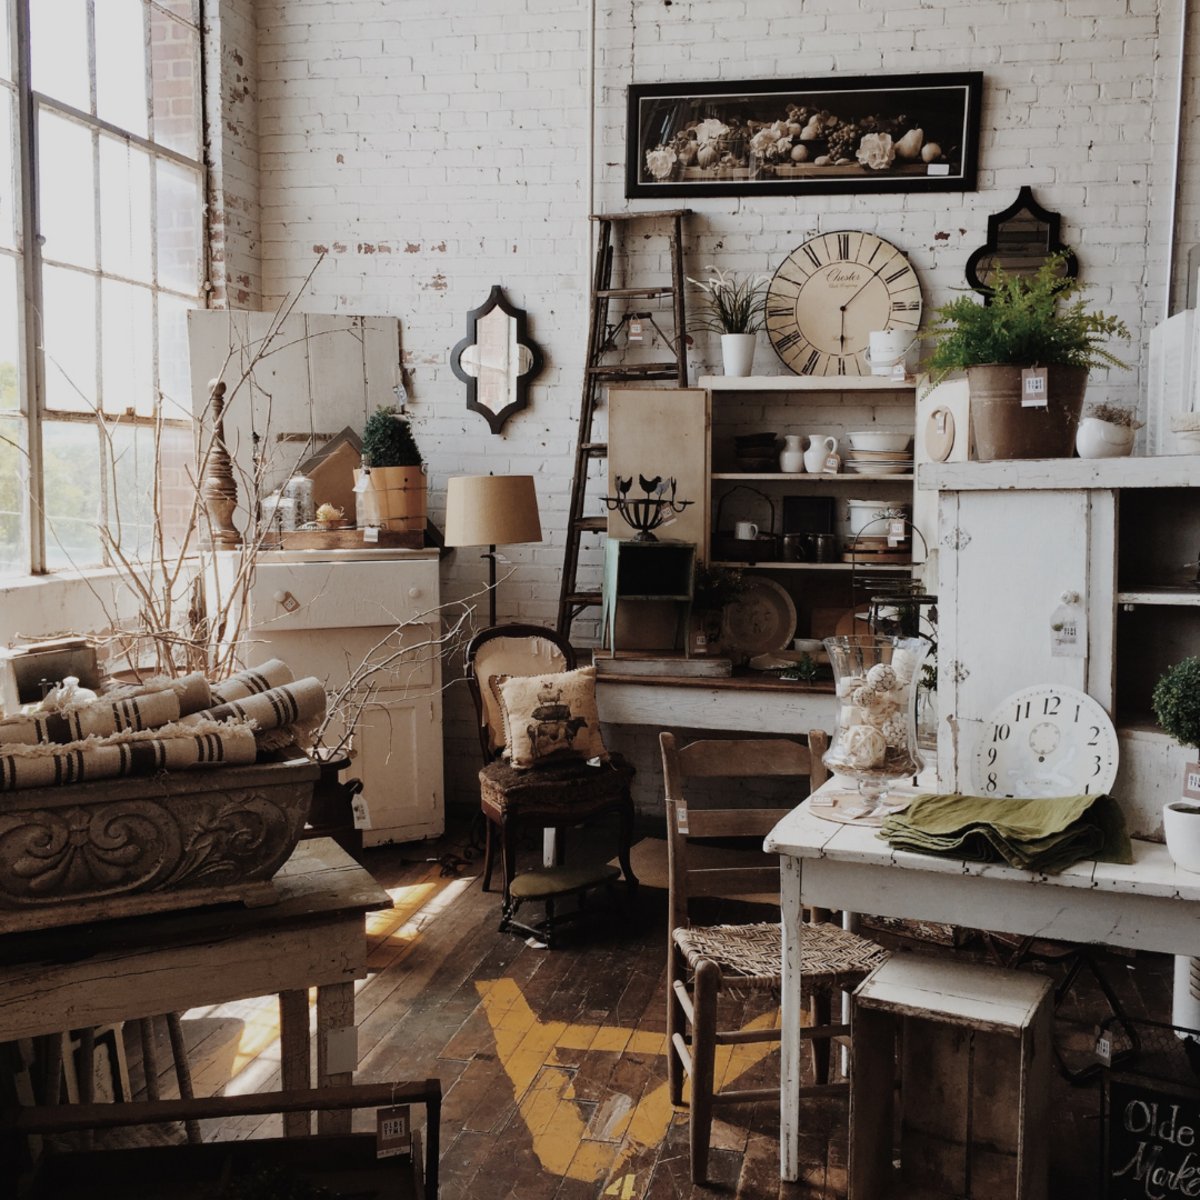 Don't miss #Vintage Market Days, an up-scale indoor/outdoor #shopping event coming to the #Bristol Motor Speedway South Building on Nov 18-20. You'll find original art, antiques, clothing, handmade treasures, and a little more. https://t.co/w5Pj7rpwHR https://t.co/0rYxnmro6Q